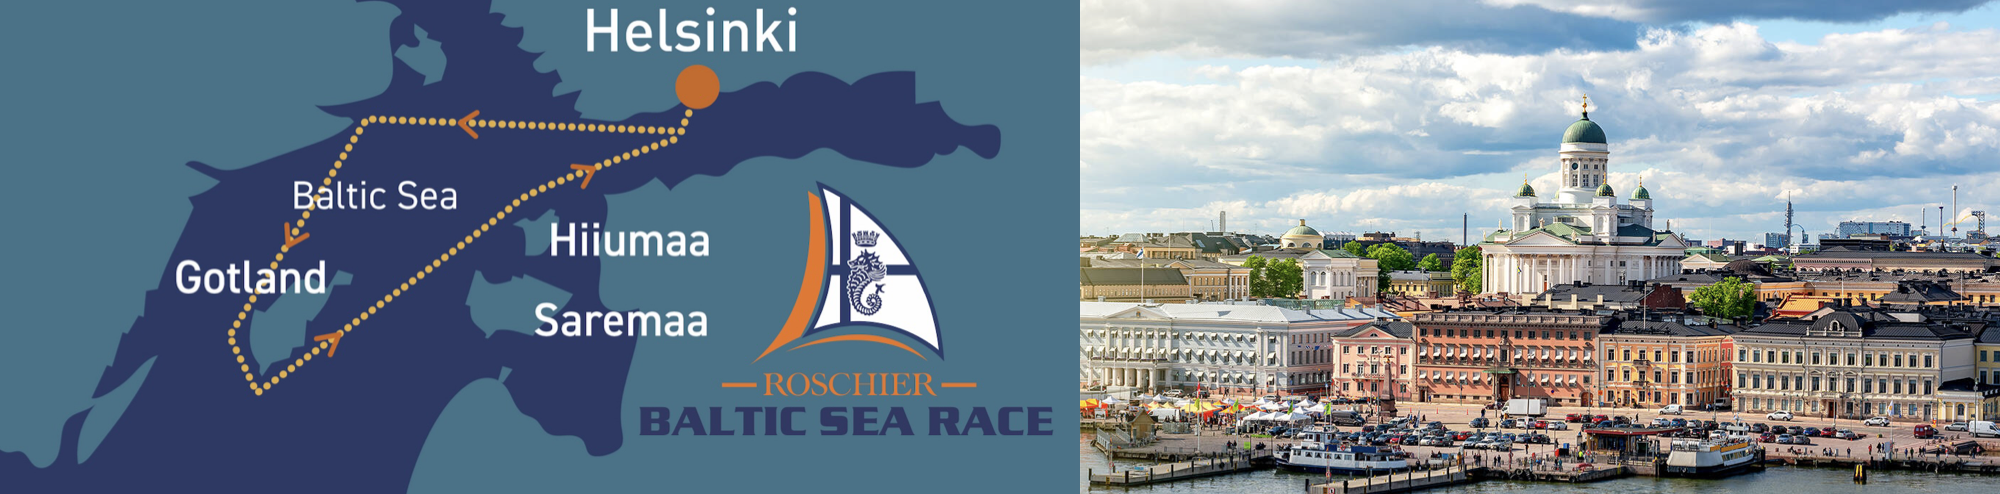 Roschier Baltic Sea Race | Discovering a new challenge